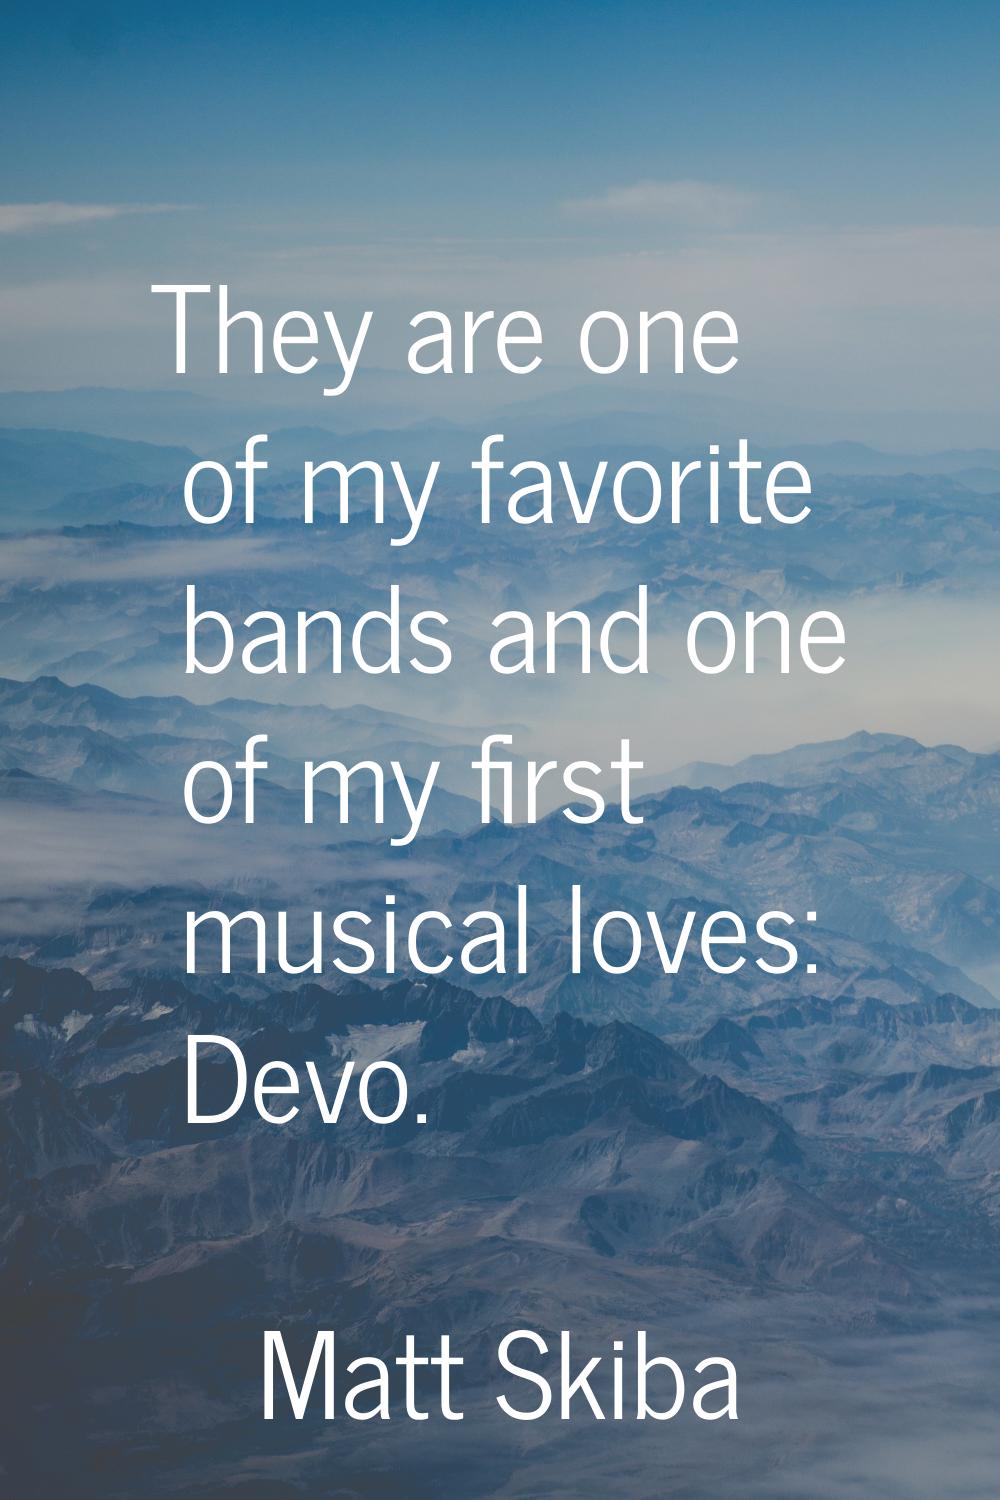 They are one of my favorite bands and one of my first musical loves: Devo.